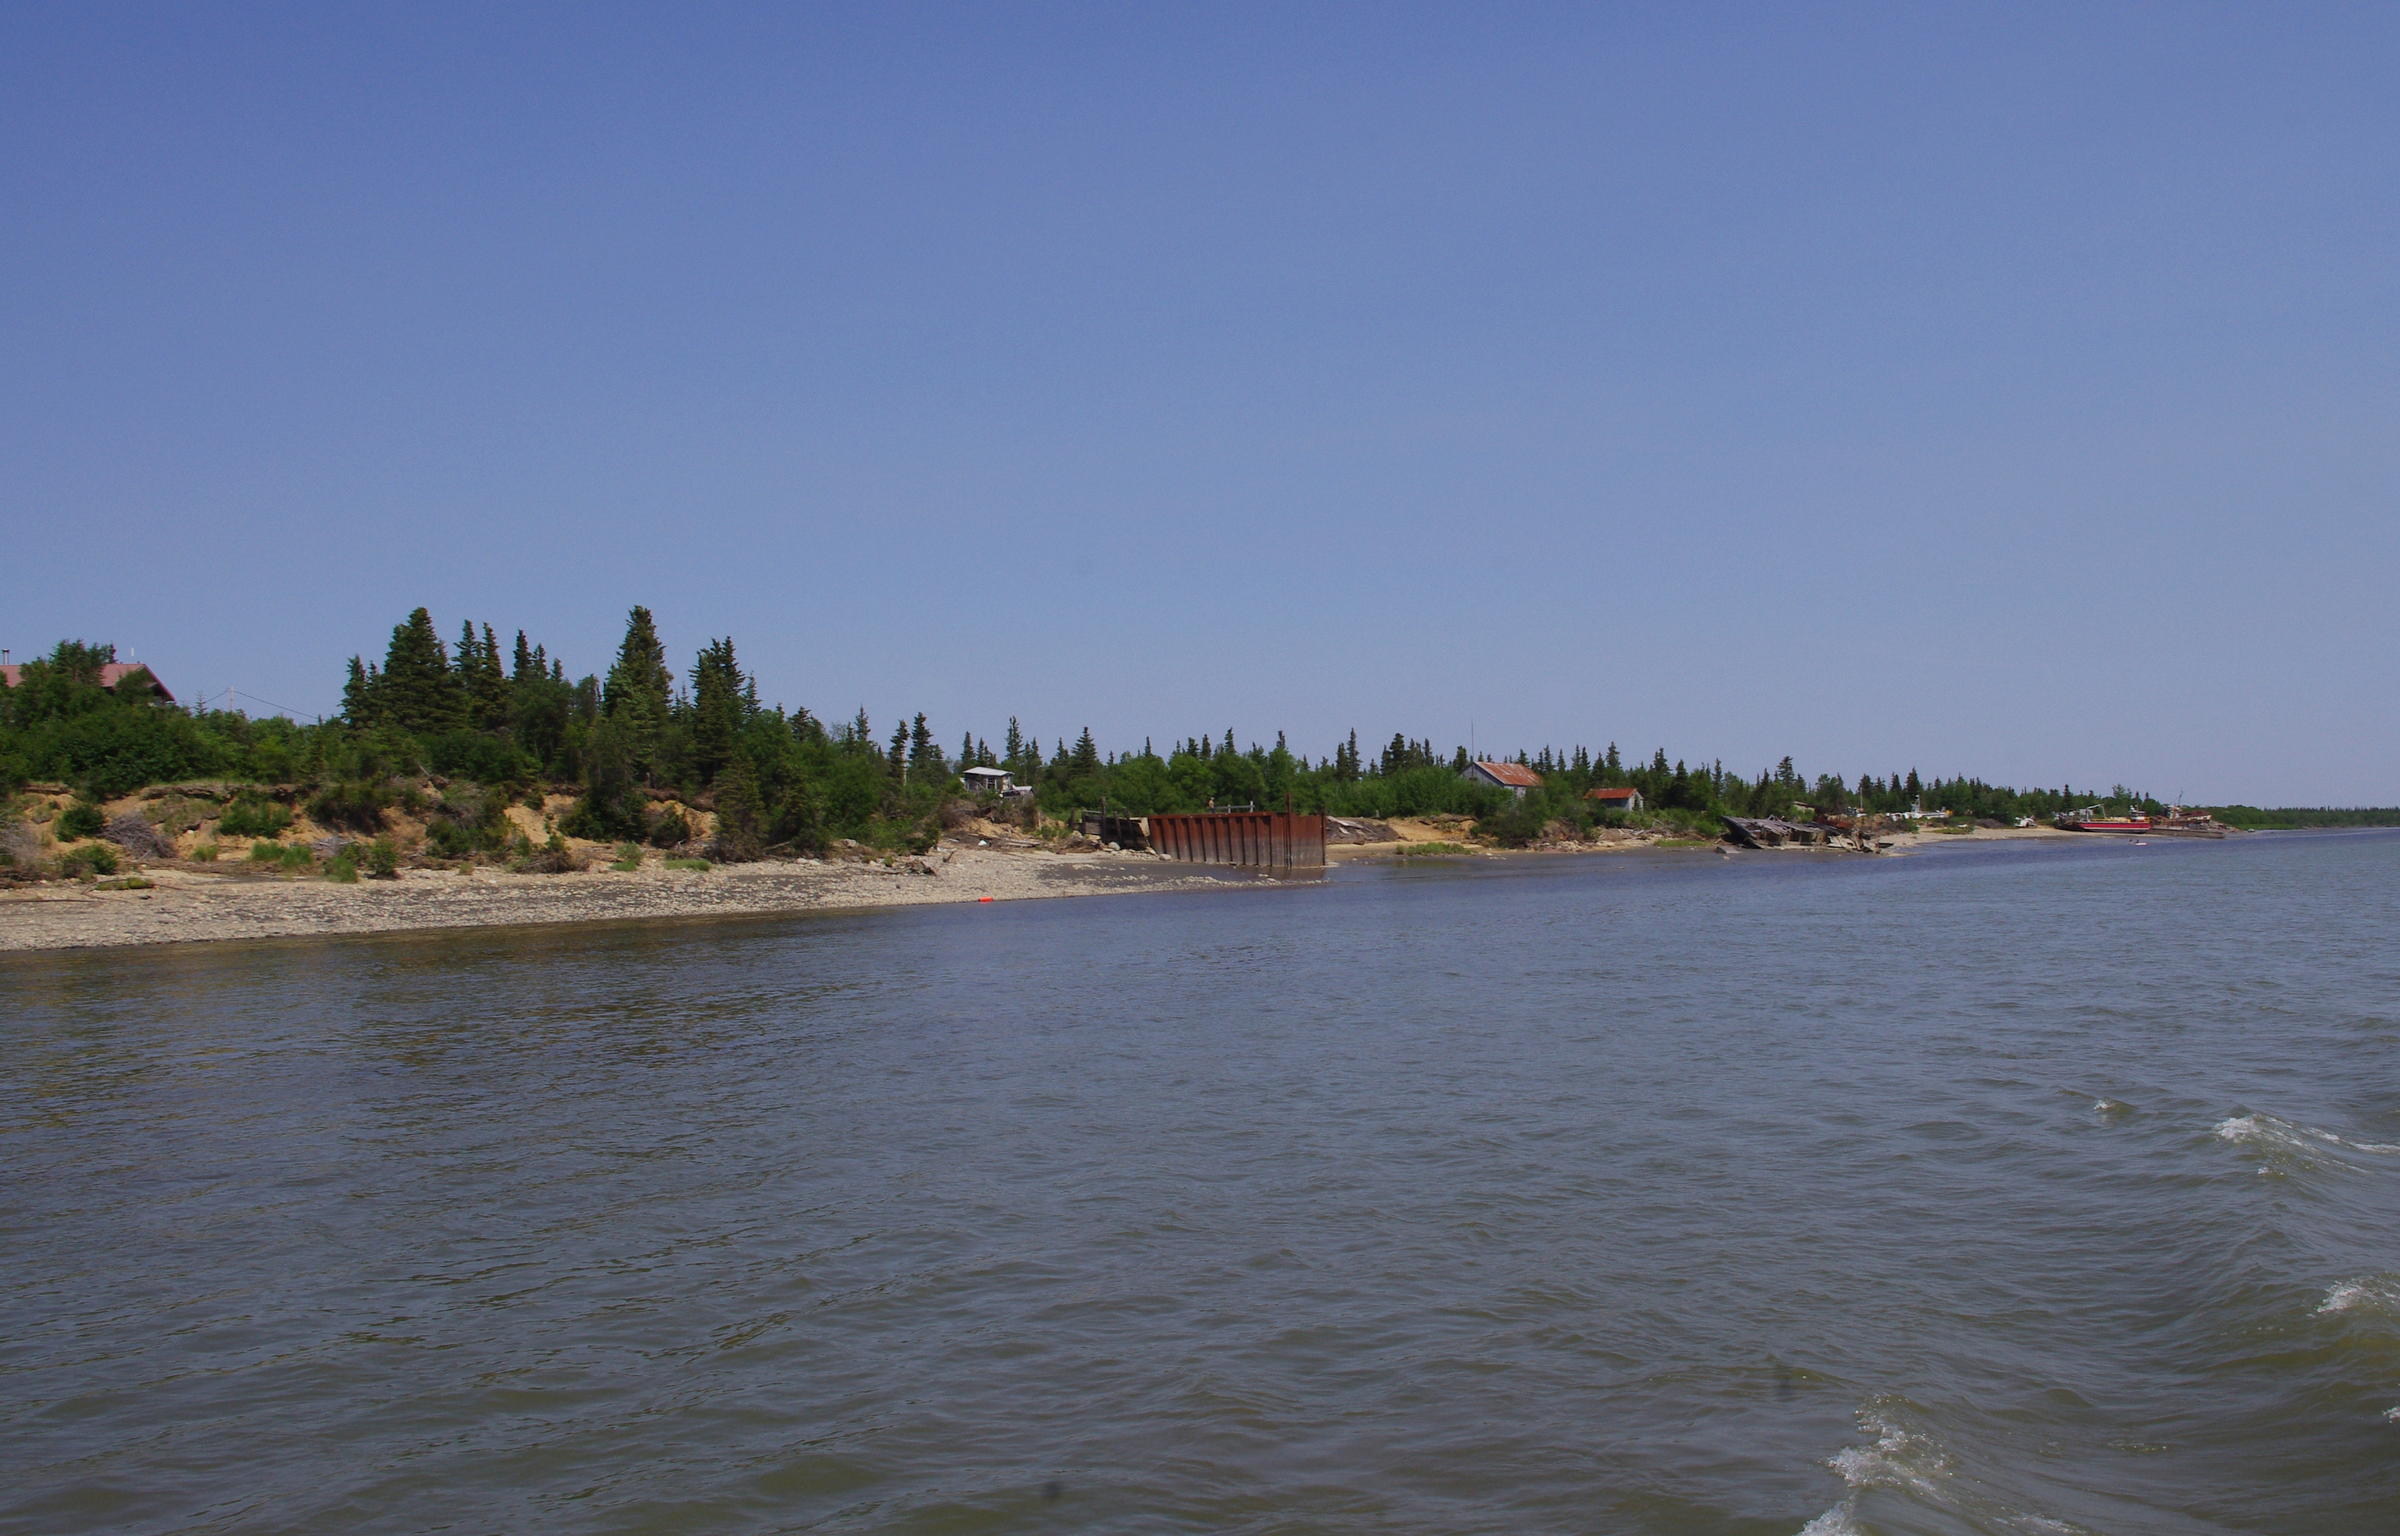 Levelock is shown in this June 2015 photo. The community on the Kvichak River is working to build a fish processing plant, which it hopes will open next year. (Photo by Molly Dischner, KDLG - Dillingham)